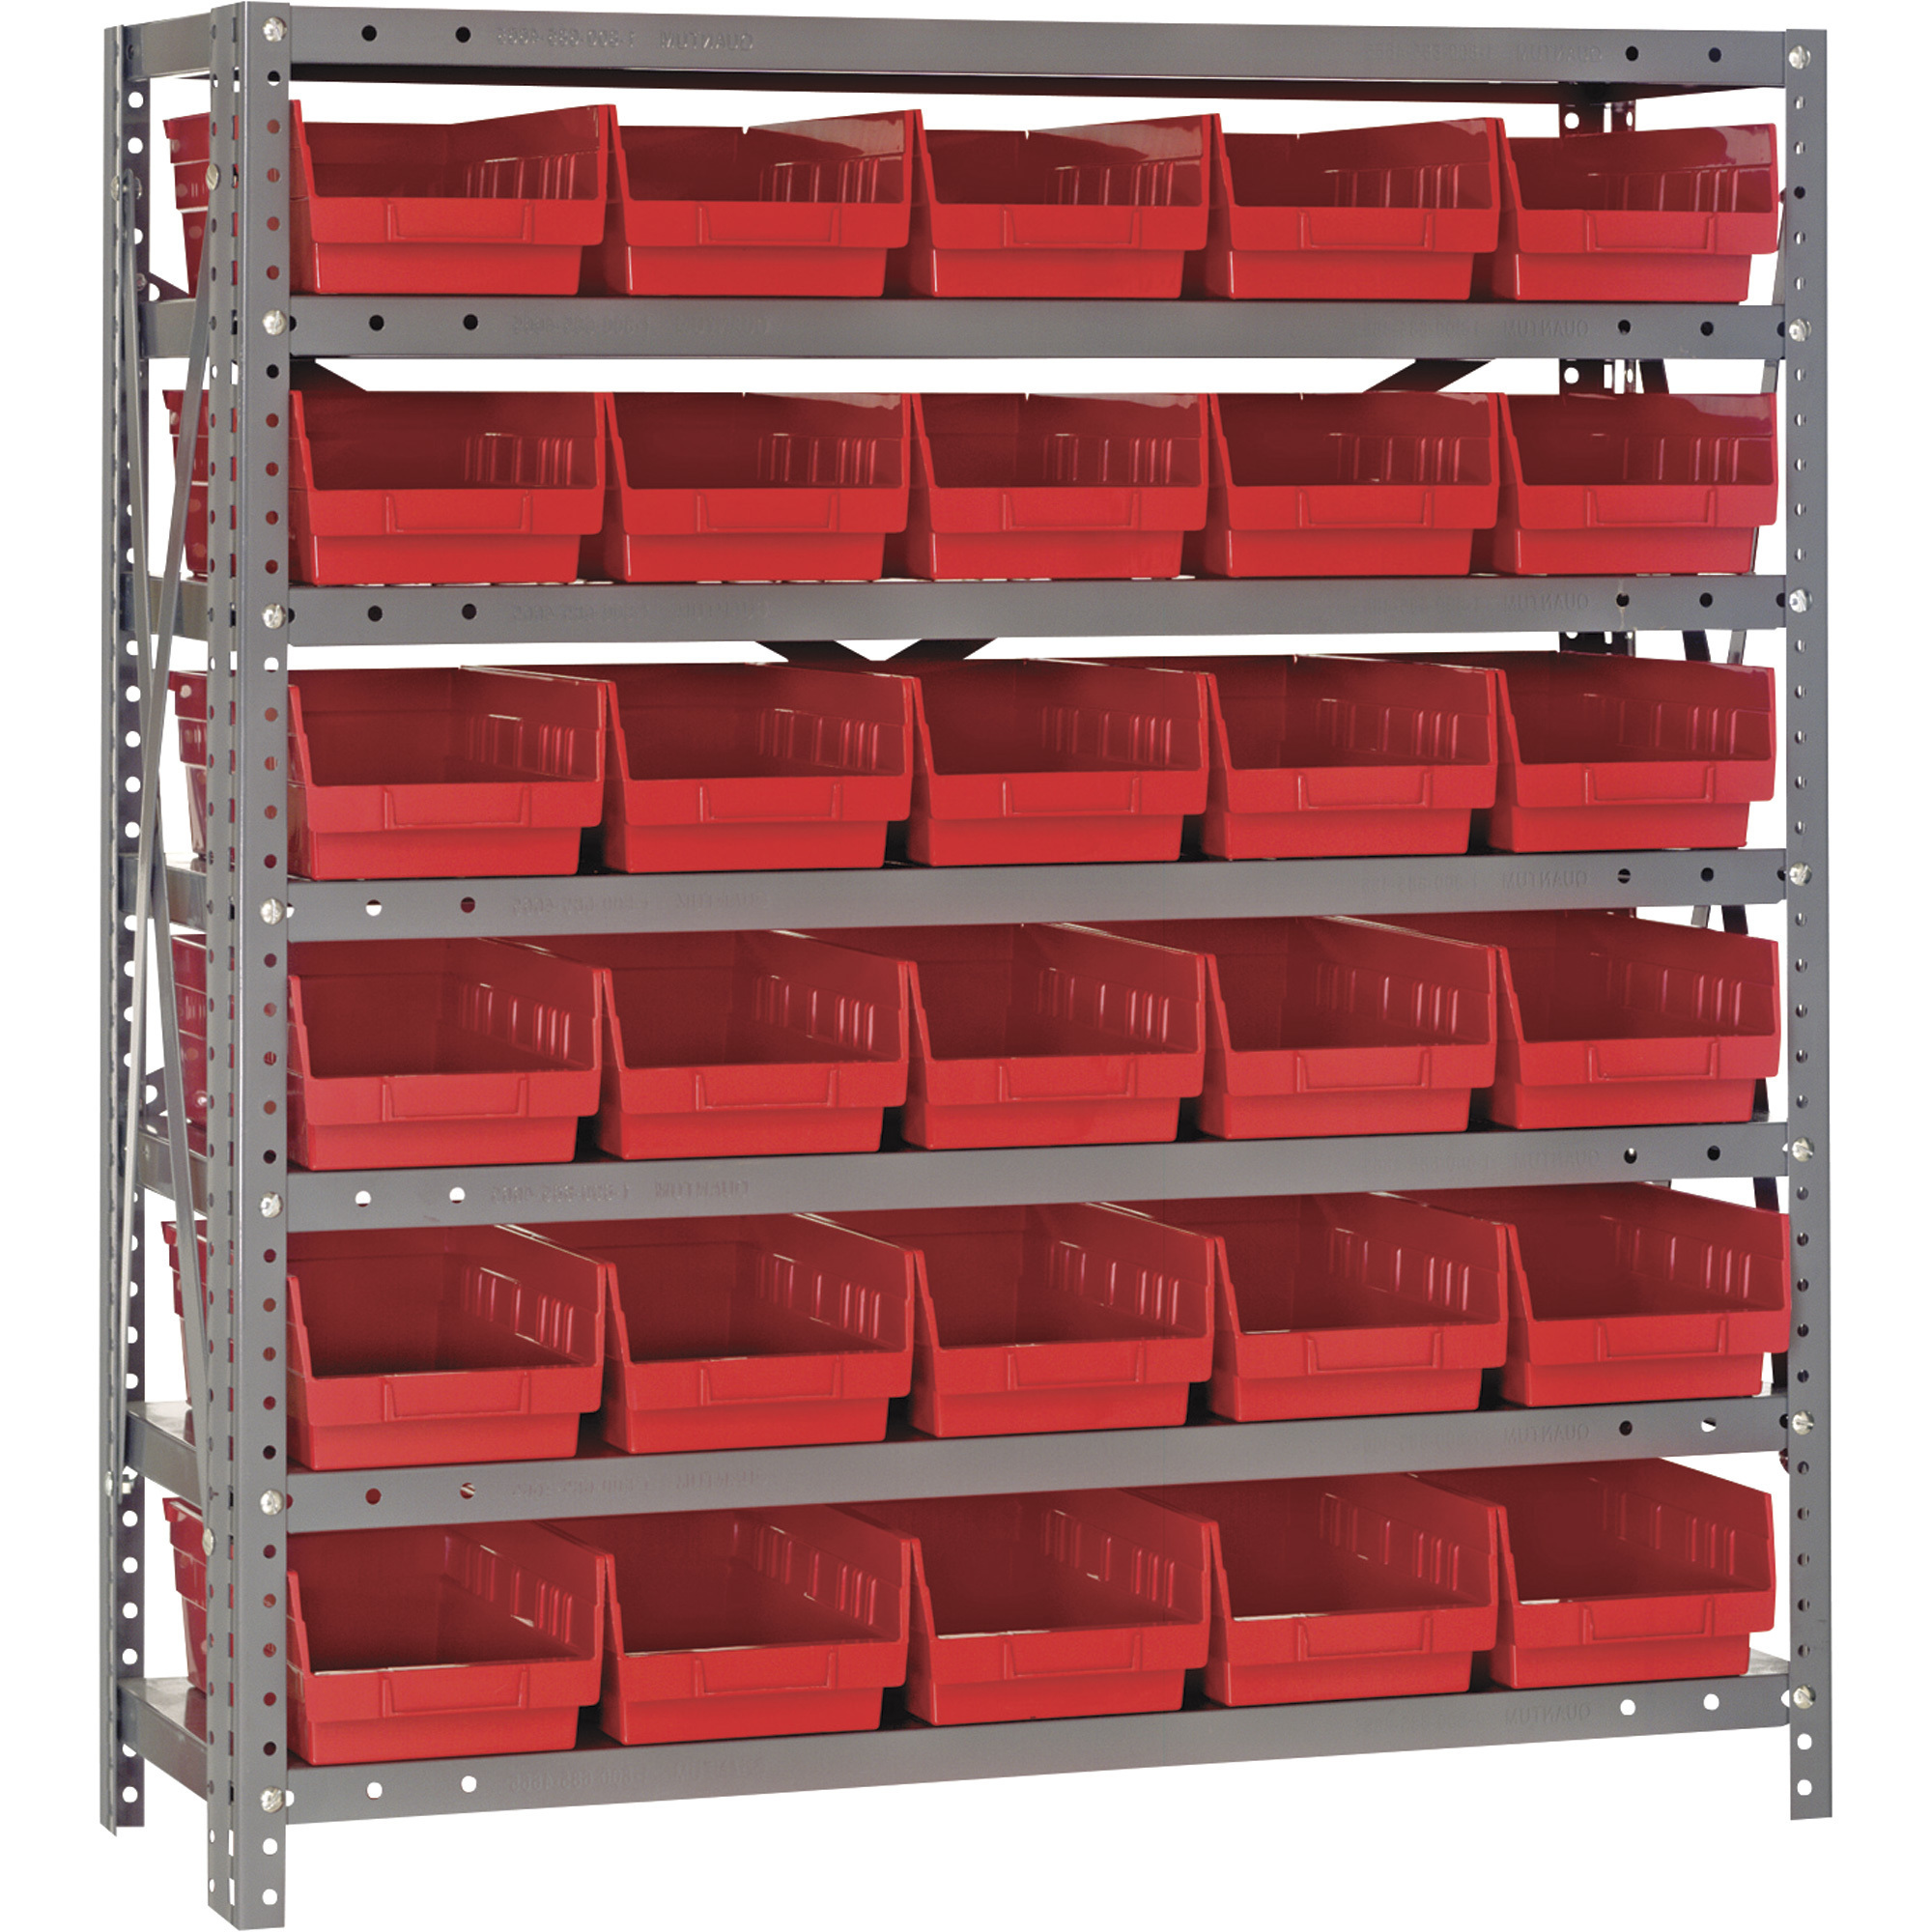 Quantum Storage Single Sided Steel Shelving Unit with 30 Bins, 36Inch W x 12Inch D x 39Inch H Rack Size, Red, Model 1239-102RD